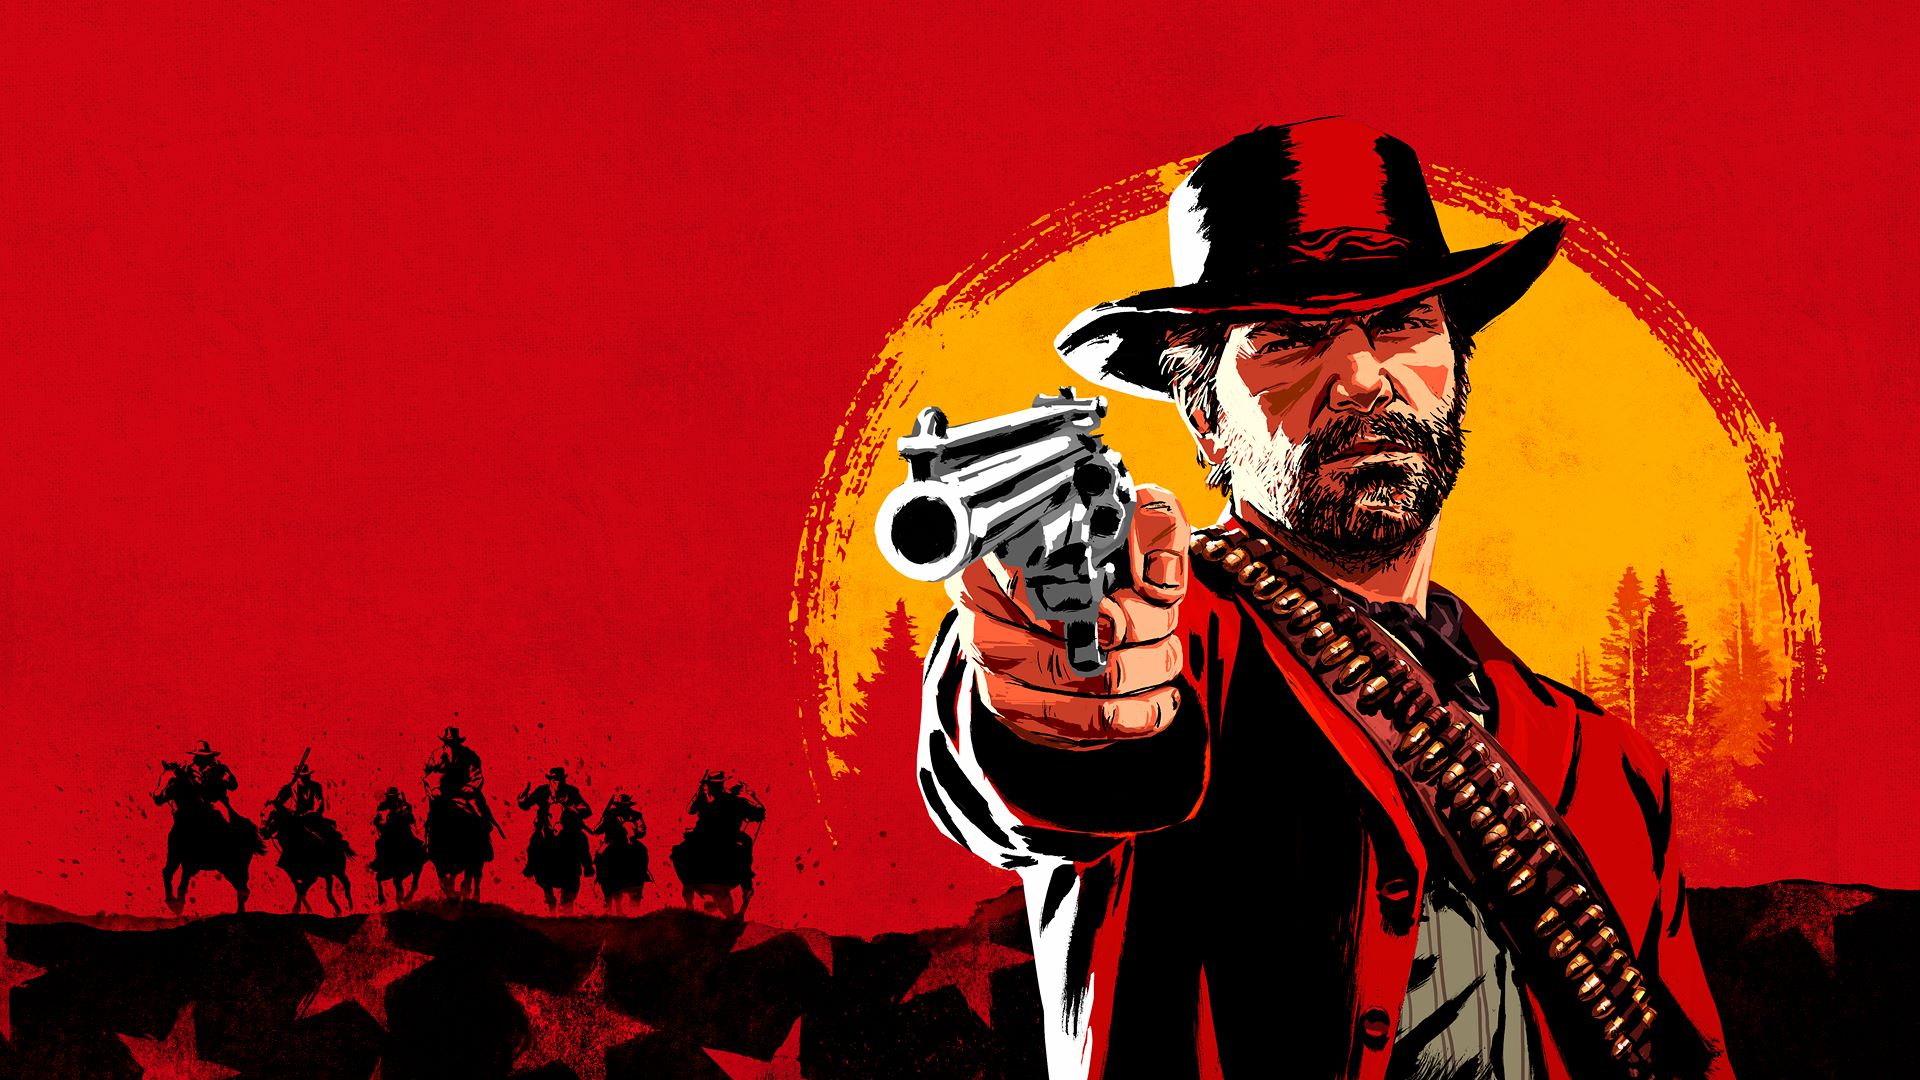 how much is red dead redemption 2 on xbox one store with game pass